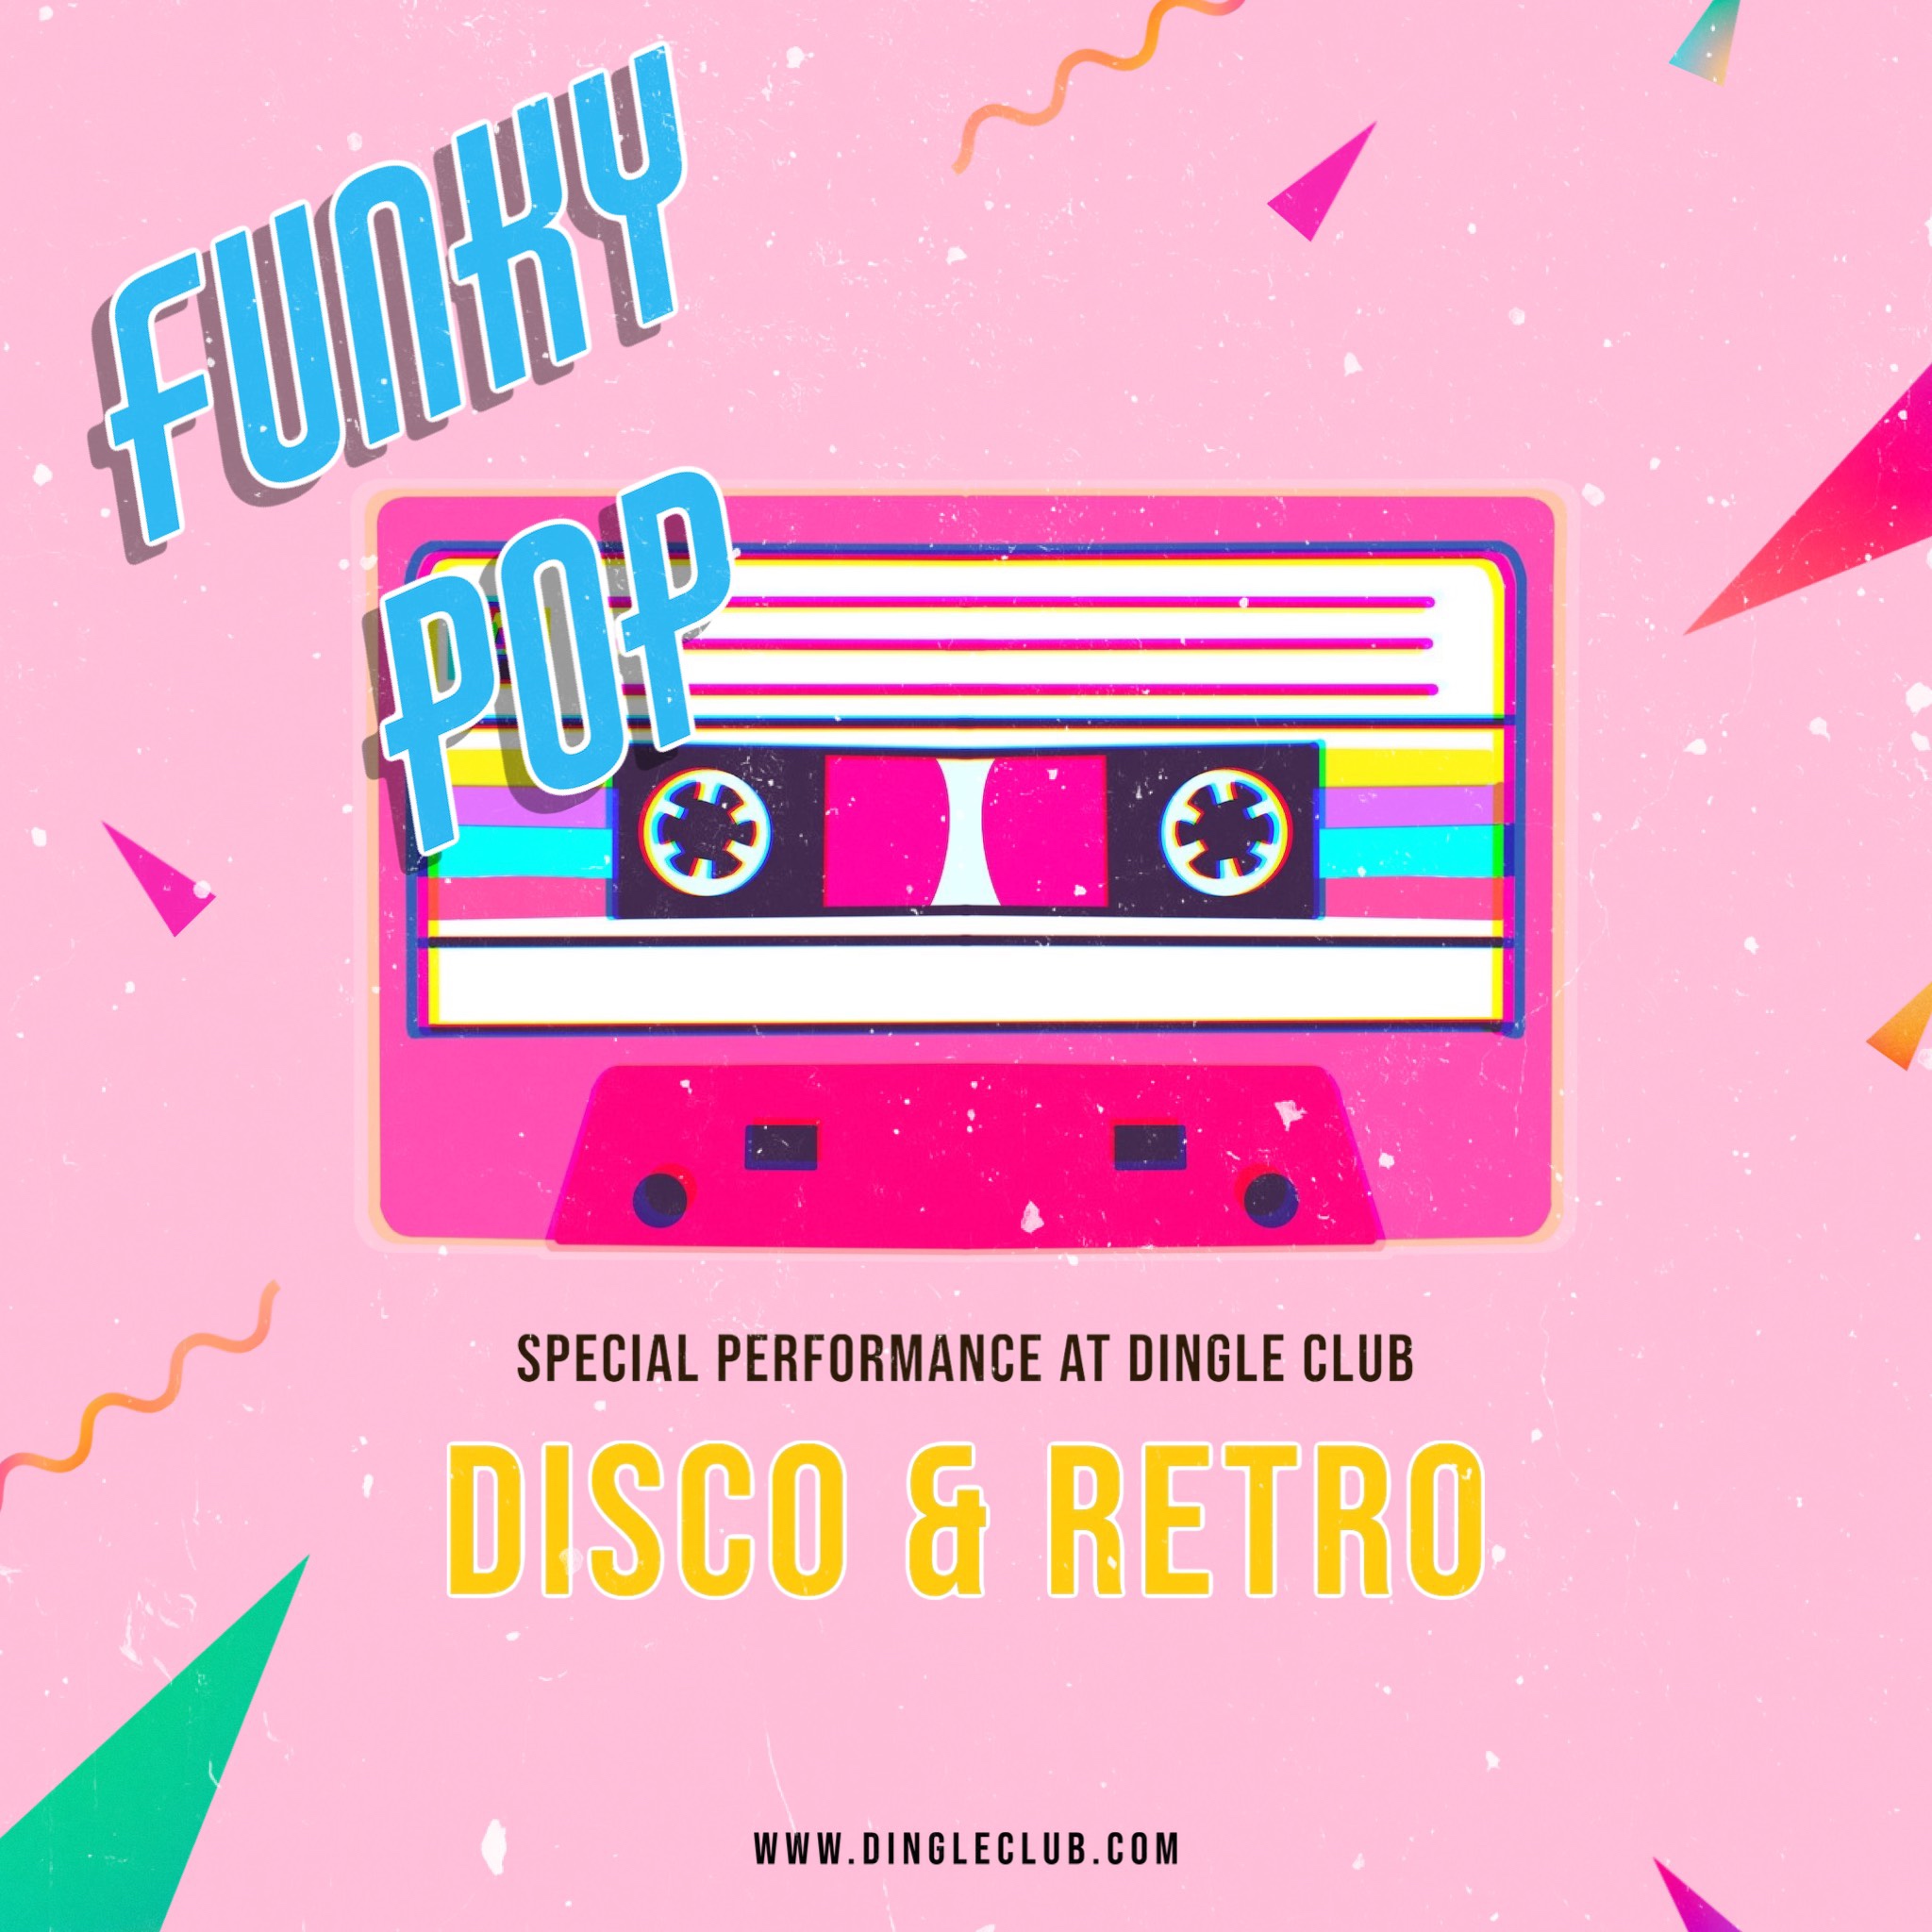 A Flyer For A Funky Pop Disco And Retro Party Music Template